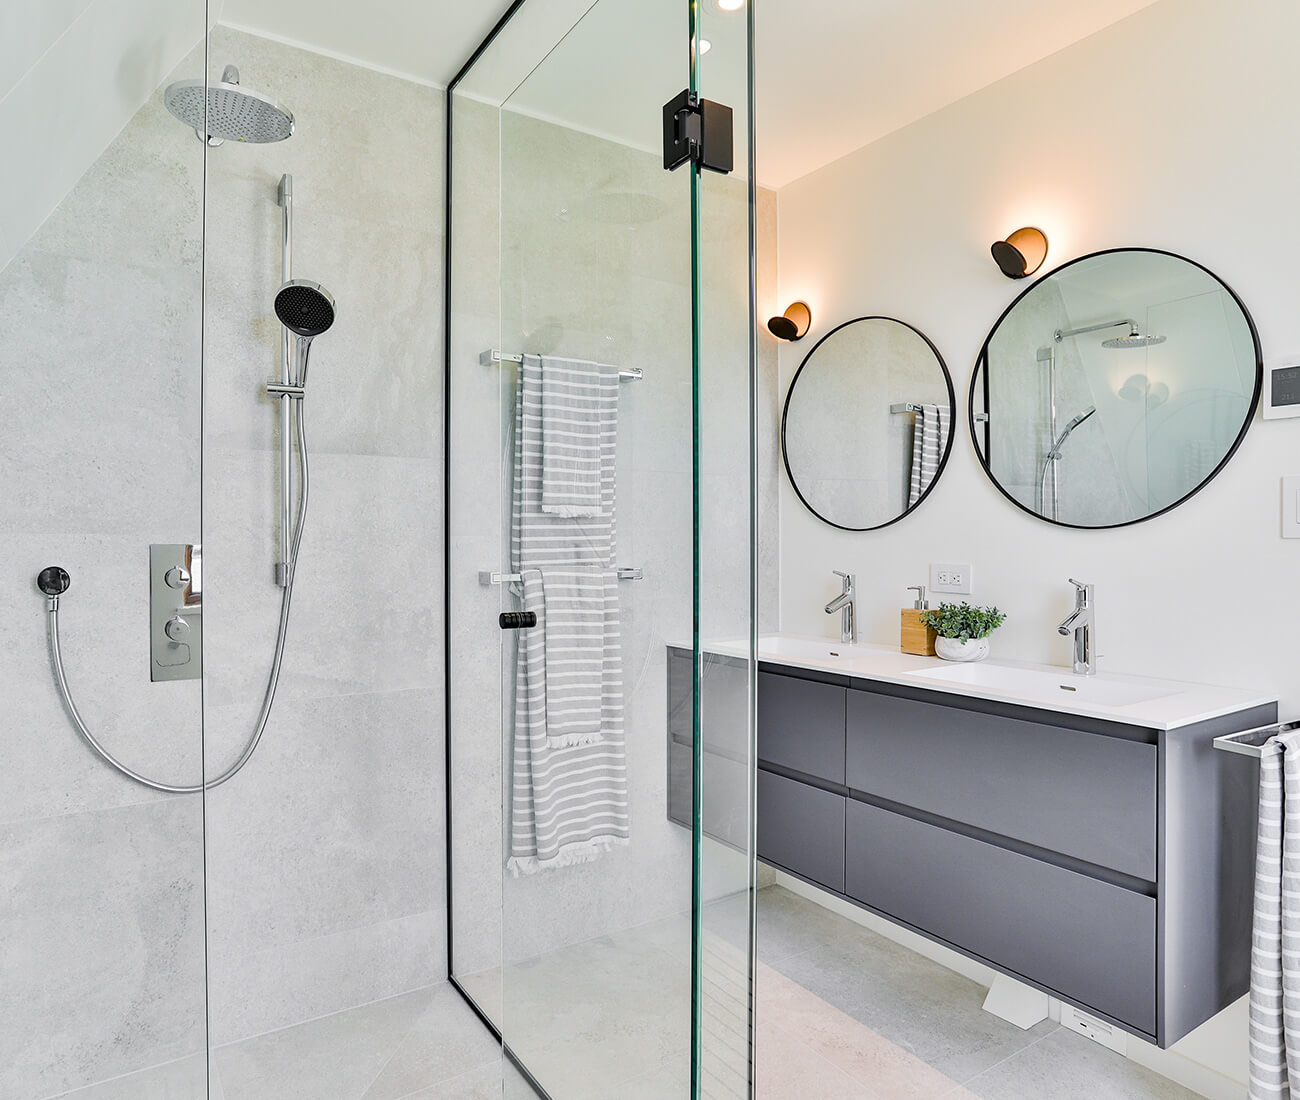 An all-glass shower enclosure by Tiqeq Homes takes centre stage in the master bath. Vanity by Muti; floor and wall ceramic tiles from Stone Tile; sconces from Casa Di Luce.